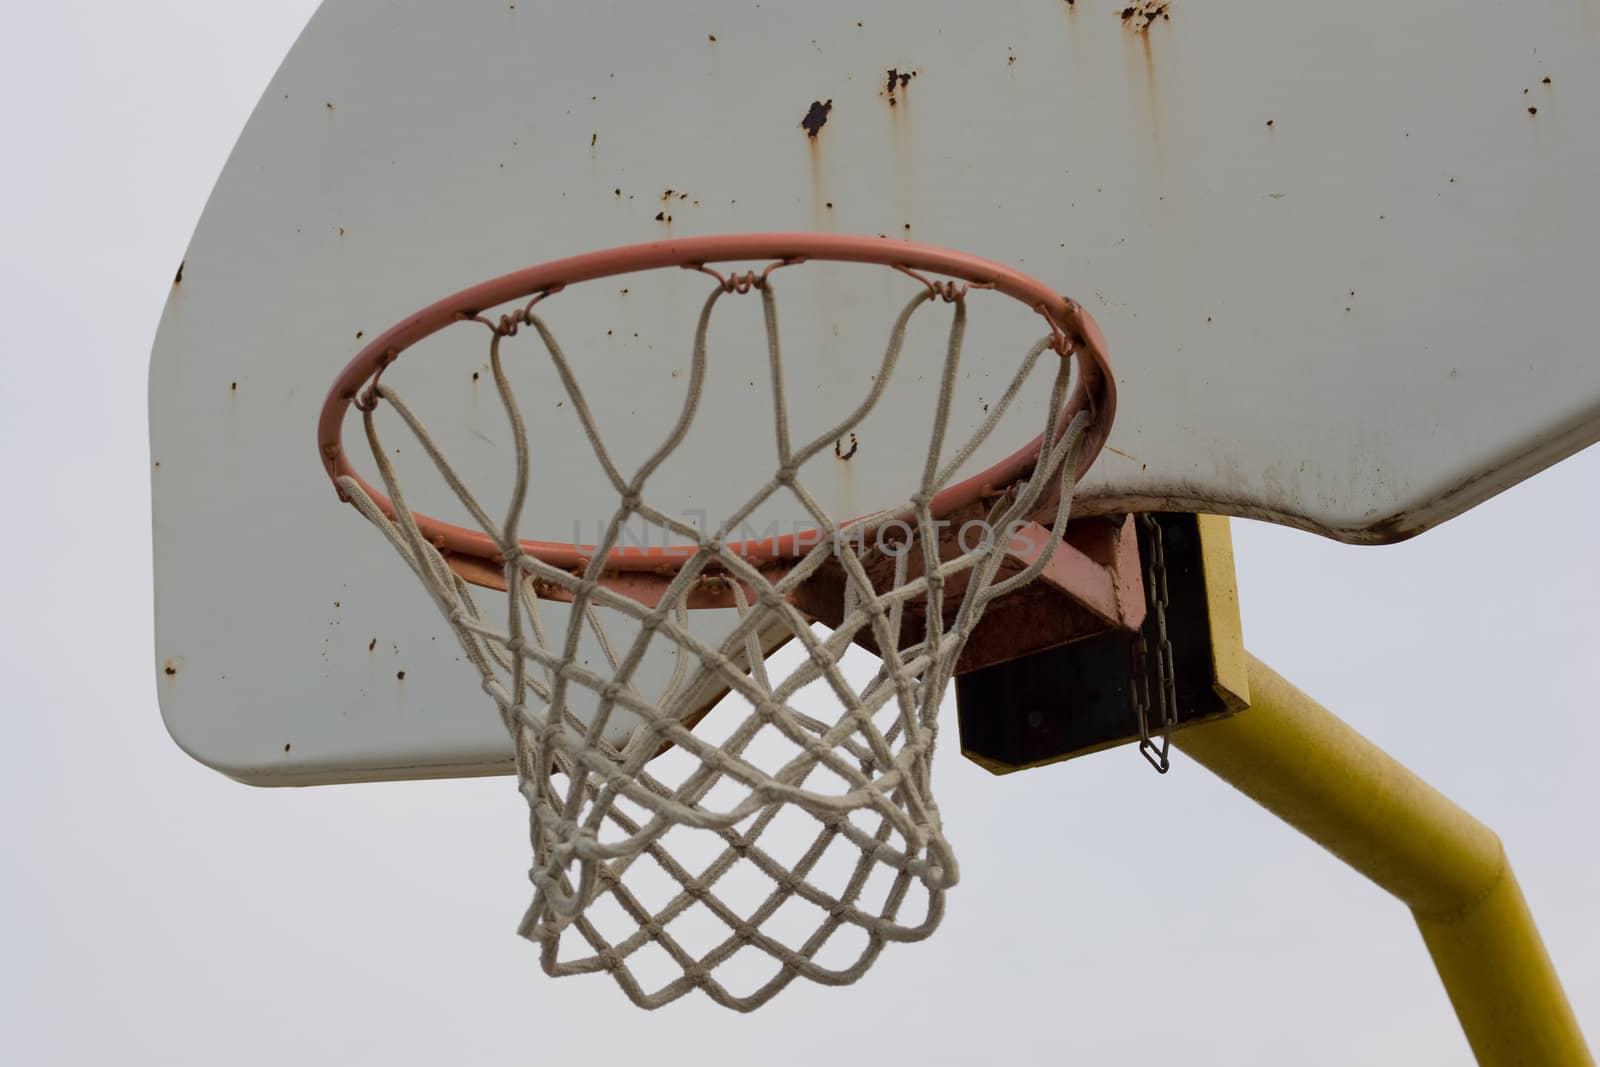 A closeup view of an old baketball net and backboard, isolated against a blue sky.